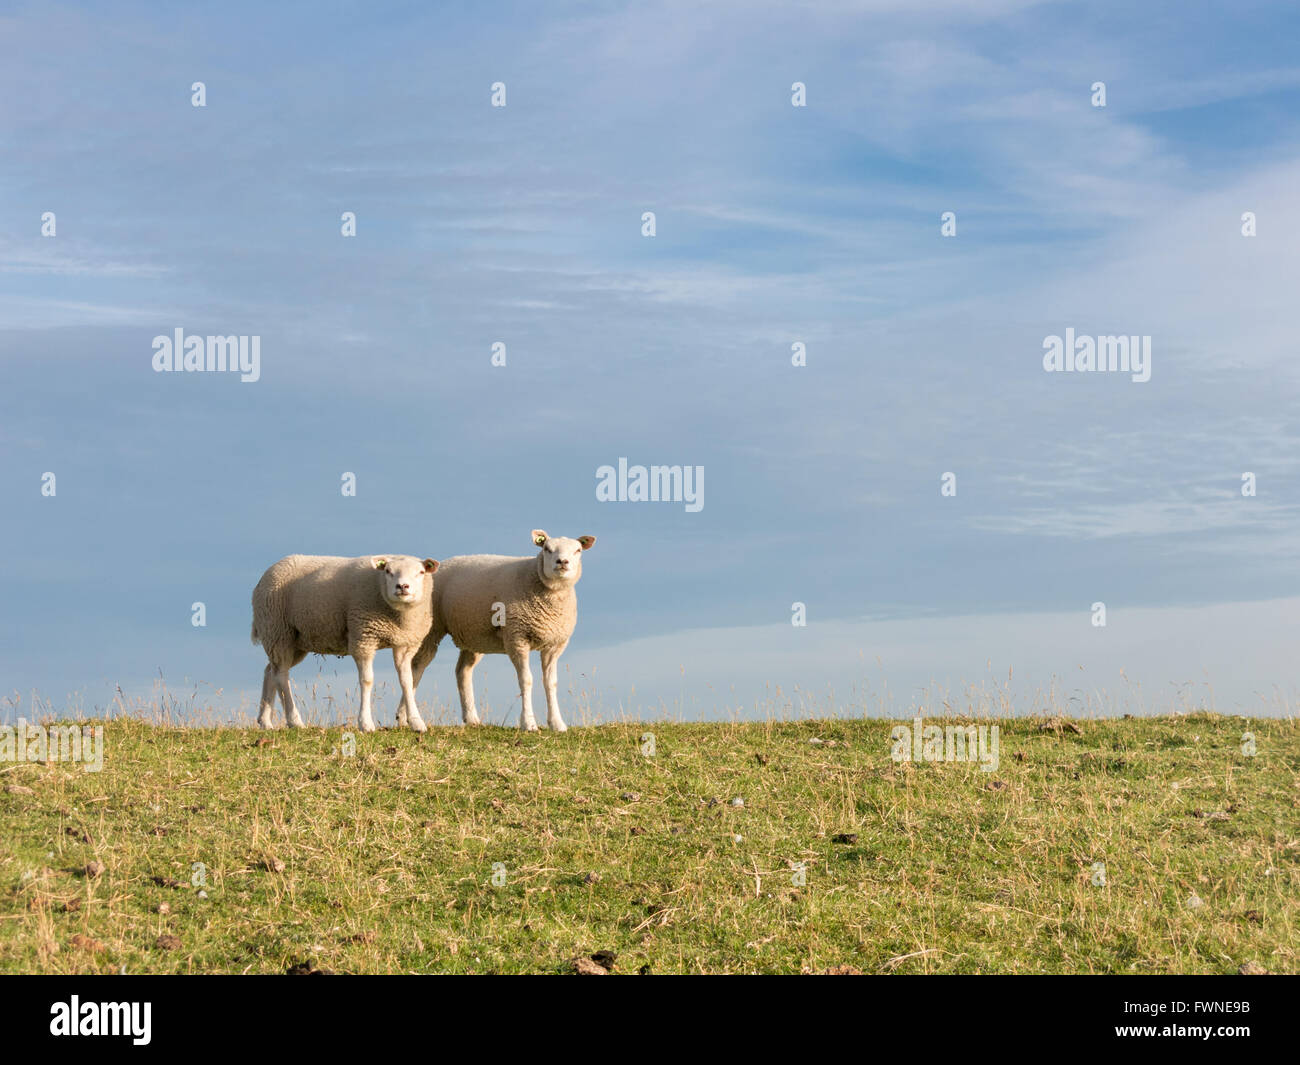 Portrait of two sheep standing side by side in a row in the grass of a polder dyke, Netherlands Stock Photo